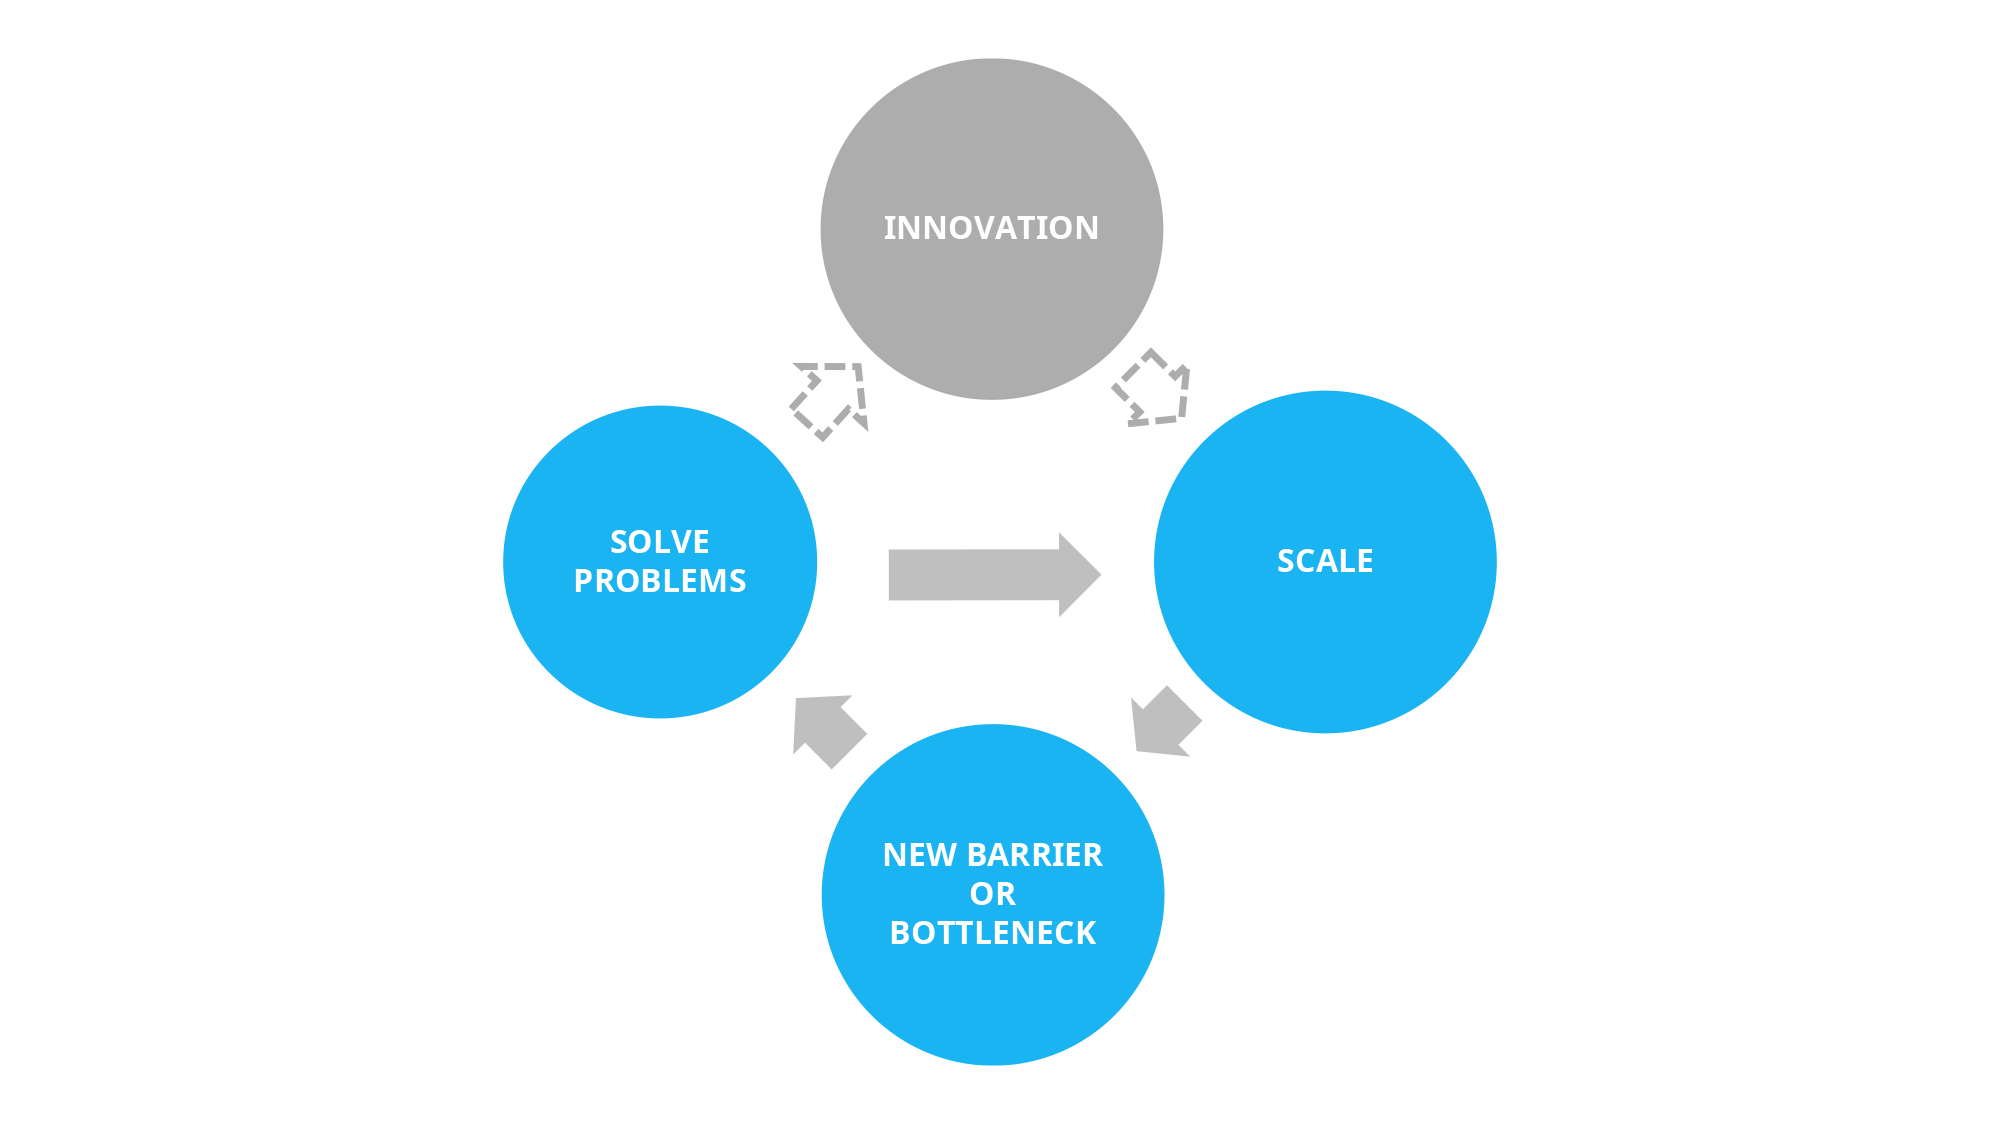 The process of scaling an innovation